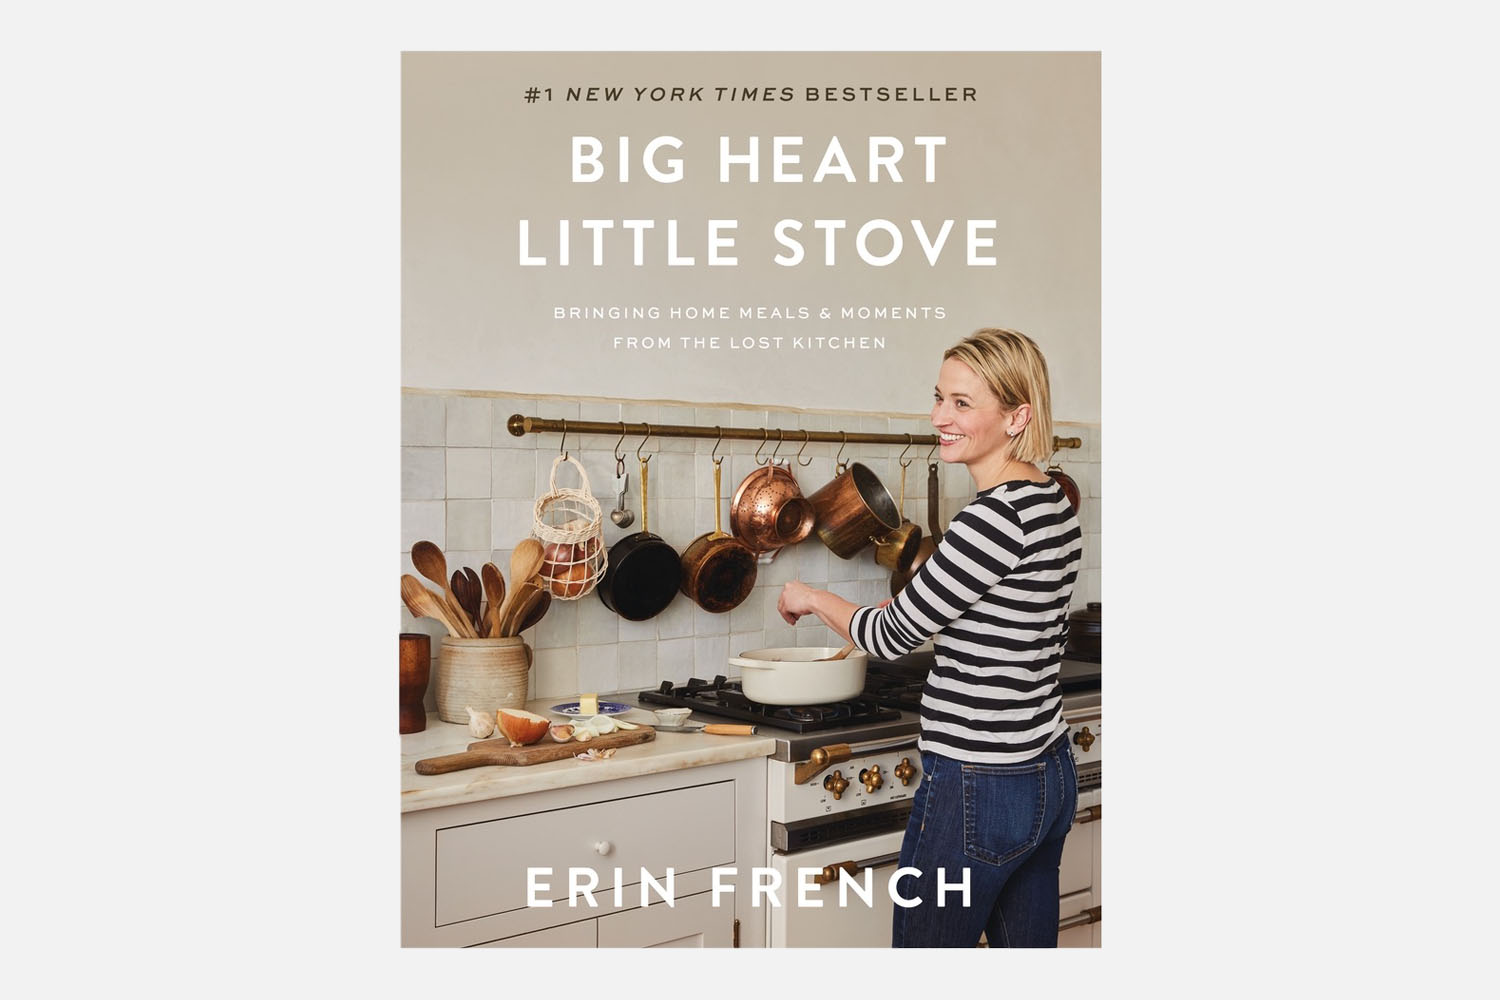 Big Heart Little Stove Cookbook by Erin French